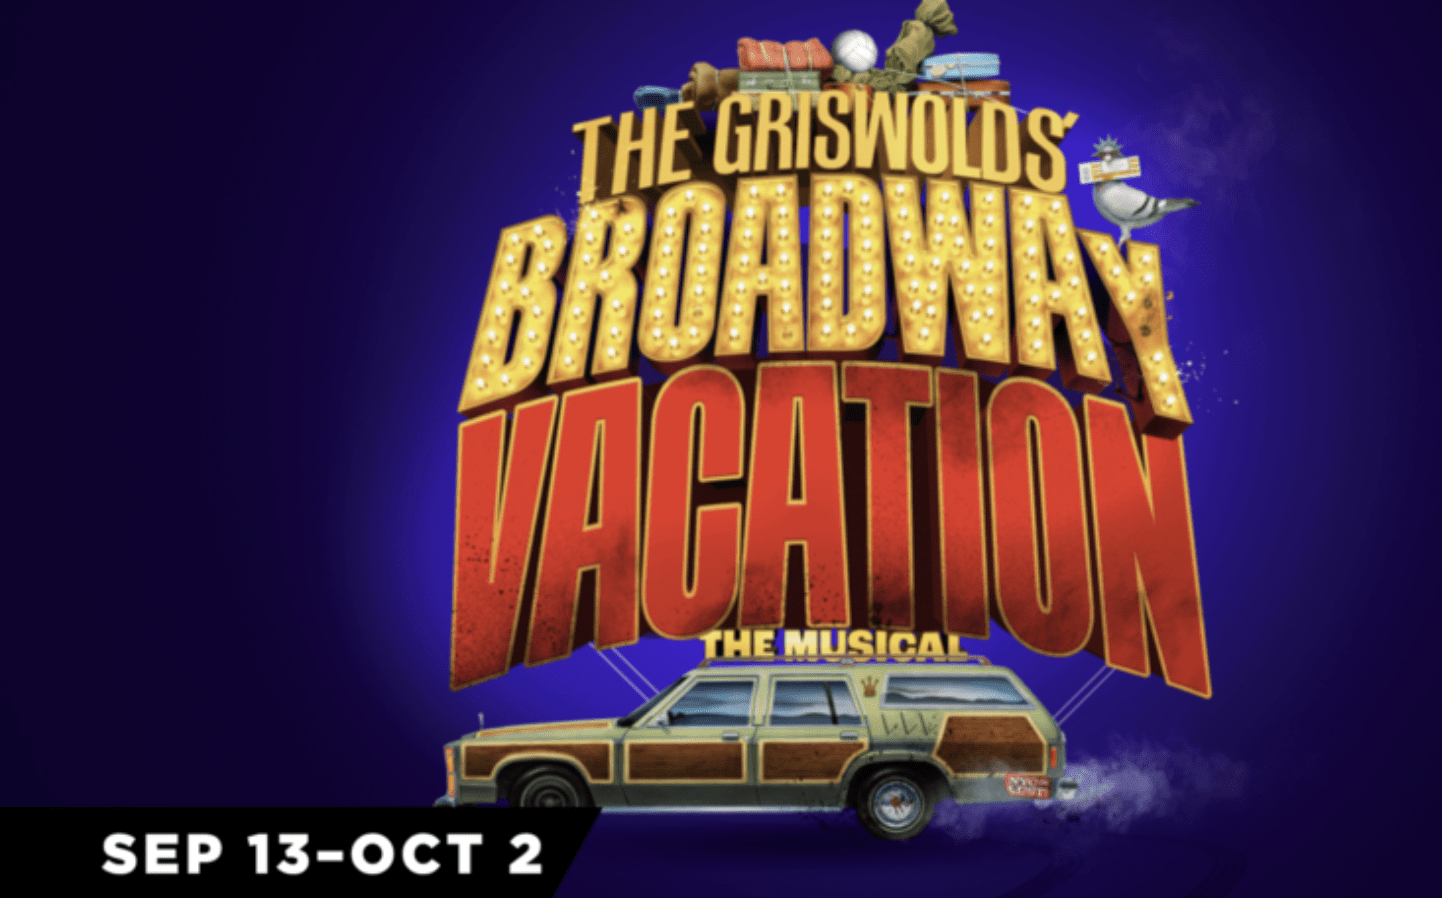 The Griswolds Broadway Vacation